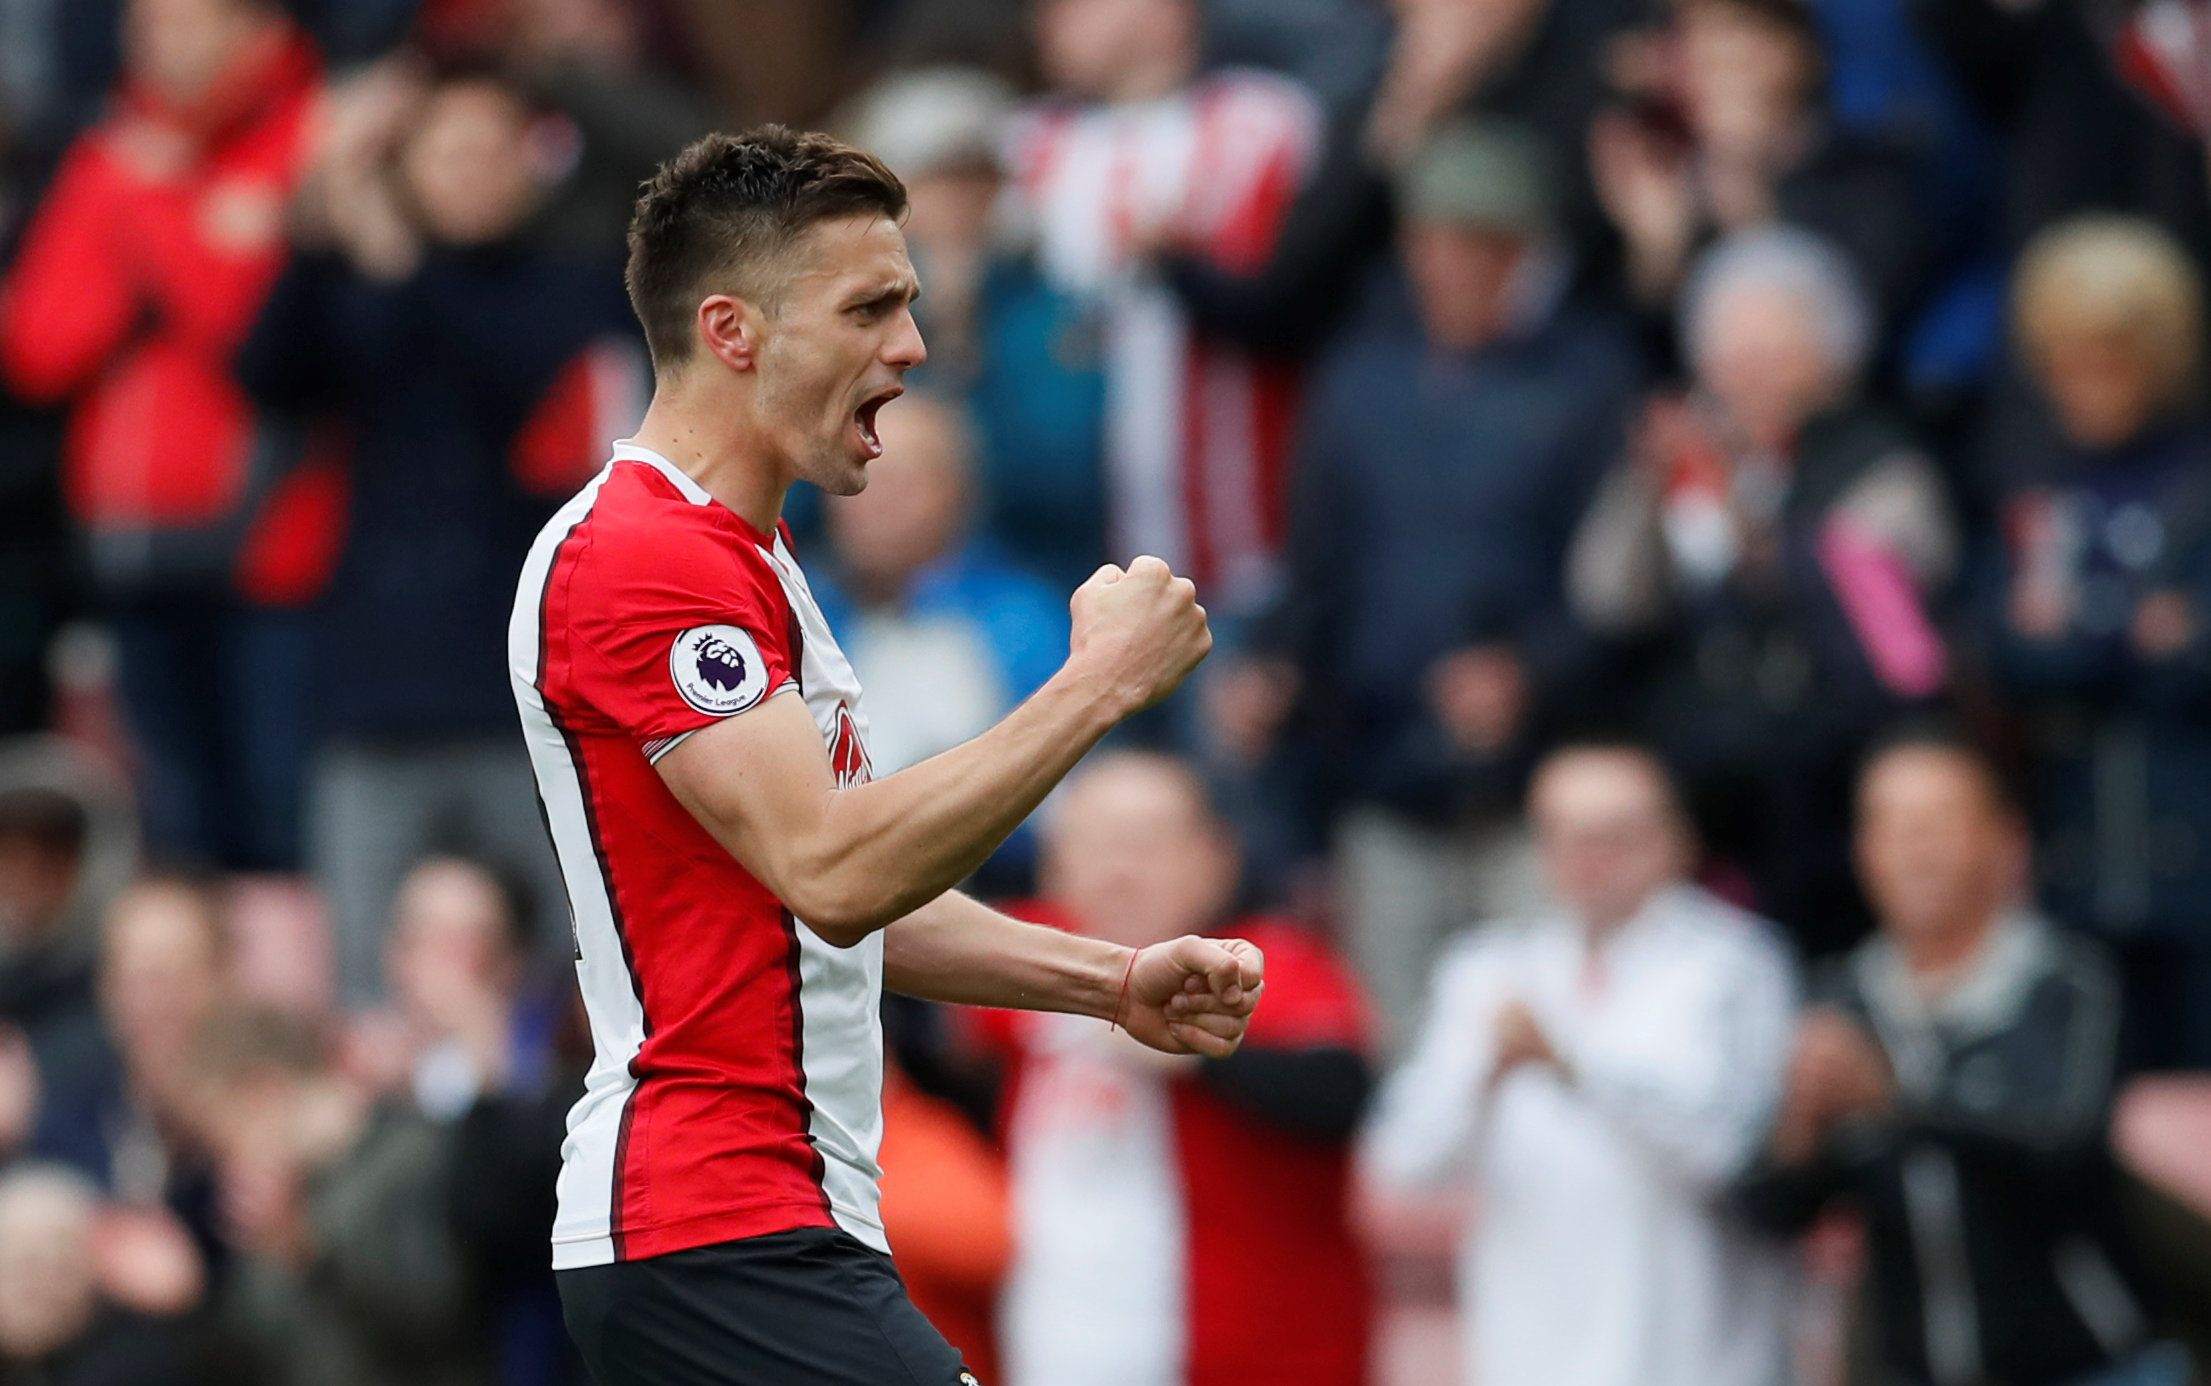 Soccer Football - Premier League - Southampton v AFC Bournemouth - St Mary's Stadium, Southampton, Britain - April 28, 2018   Southampton's Dusan Tadic celebrates at the end of the match    REUTERS/David Klein    EDITORIAL USE ONLY. No use with unauthorized audio, video, data, fixture lists, club/league logos or 